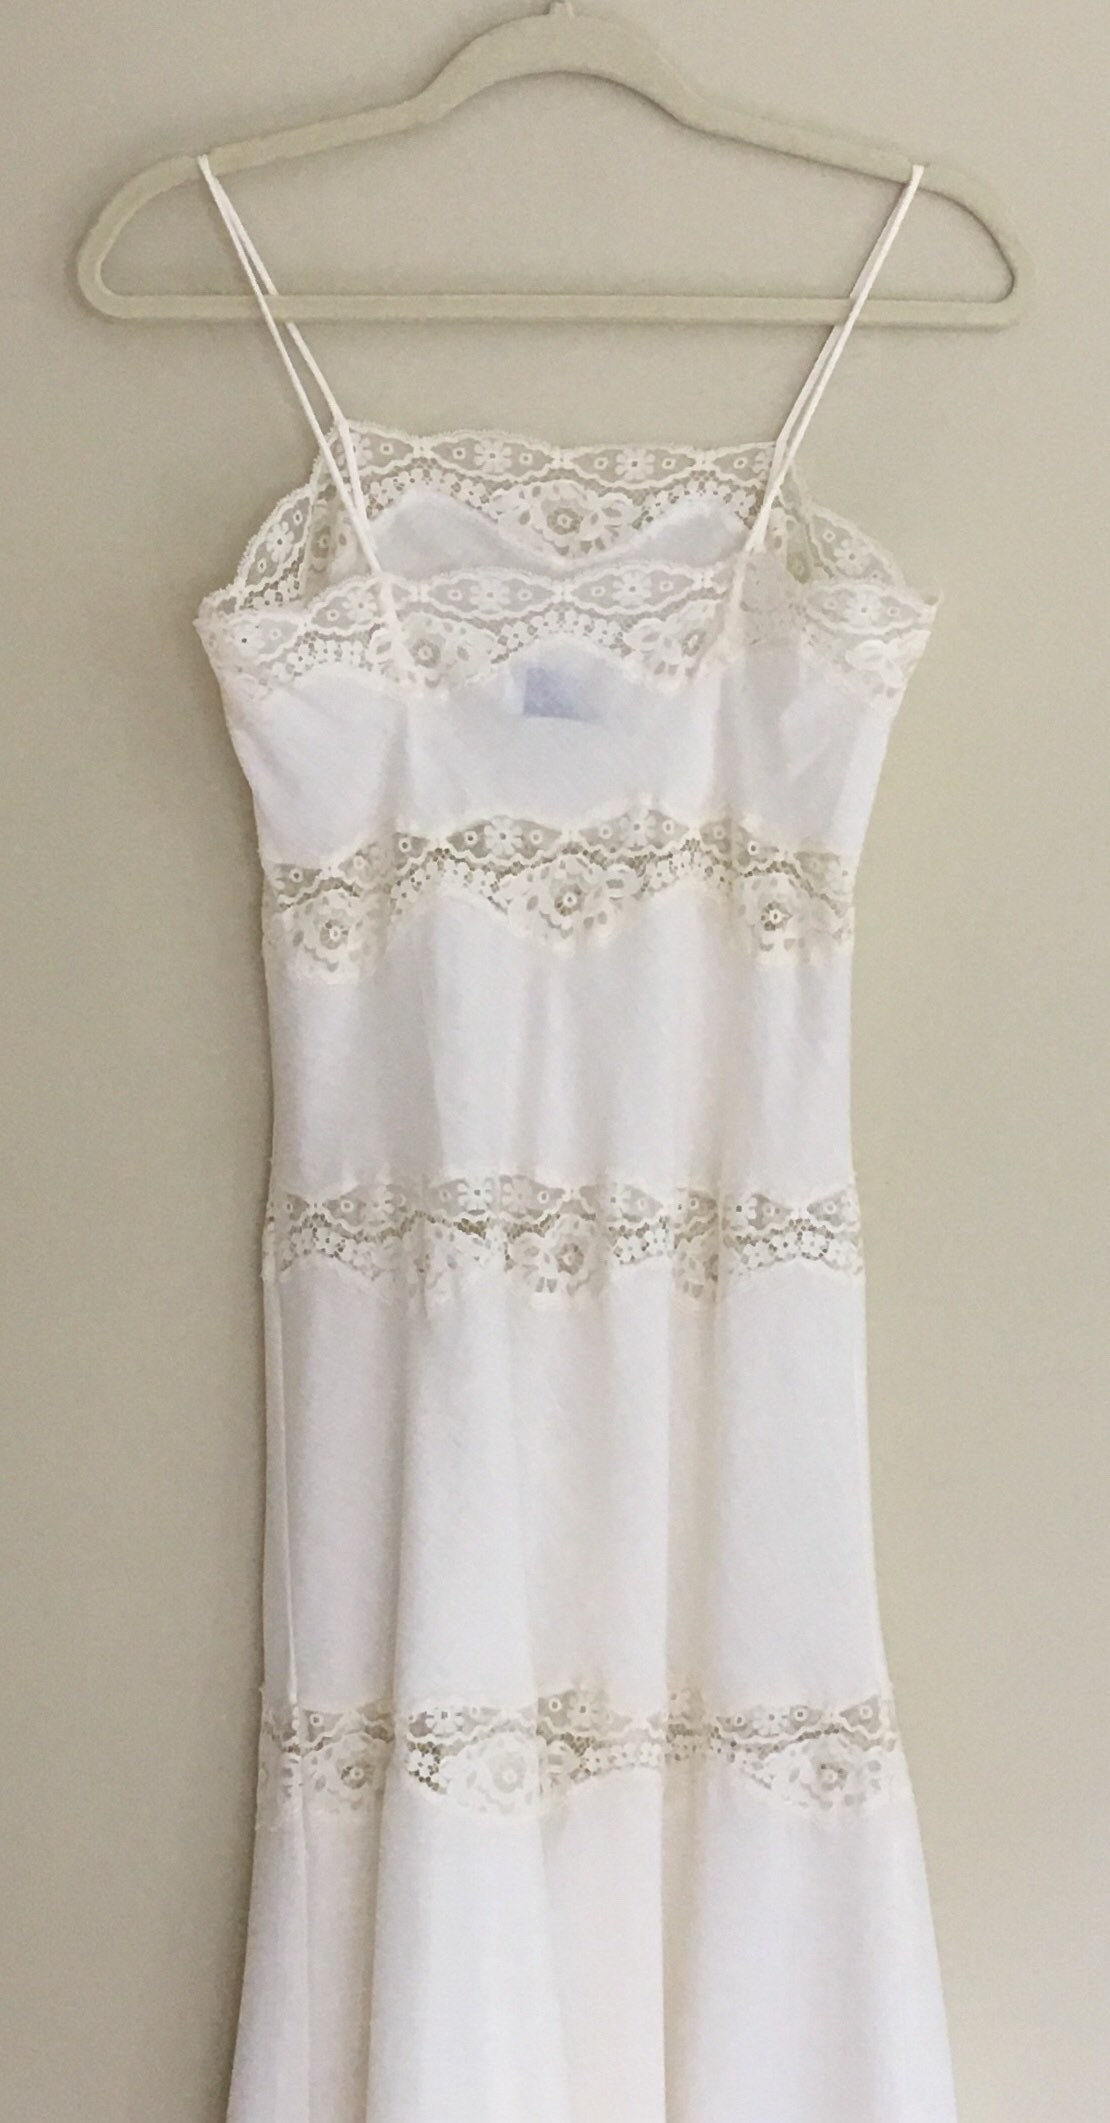 Long White Lace Nightgown Slip Nightie Vintage Lily of France Romantic ...